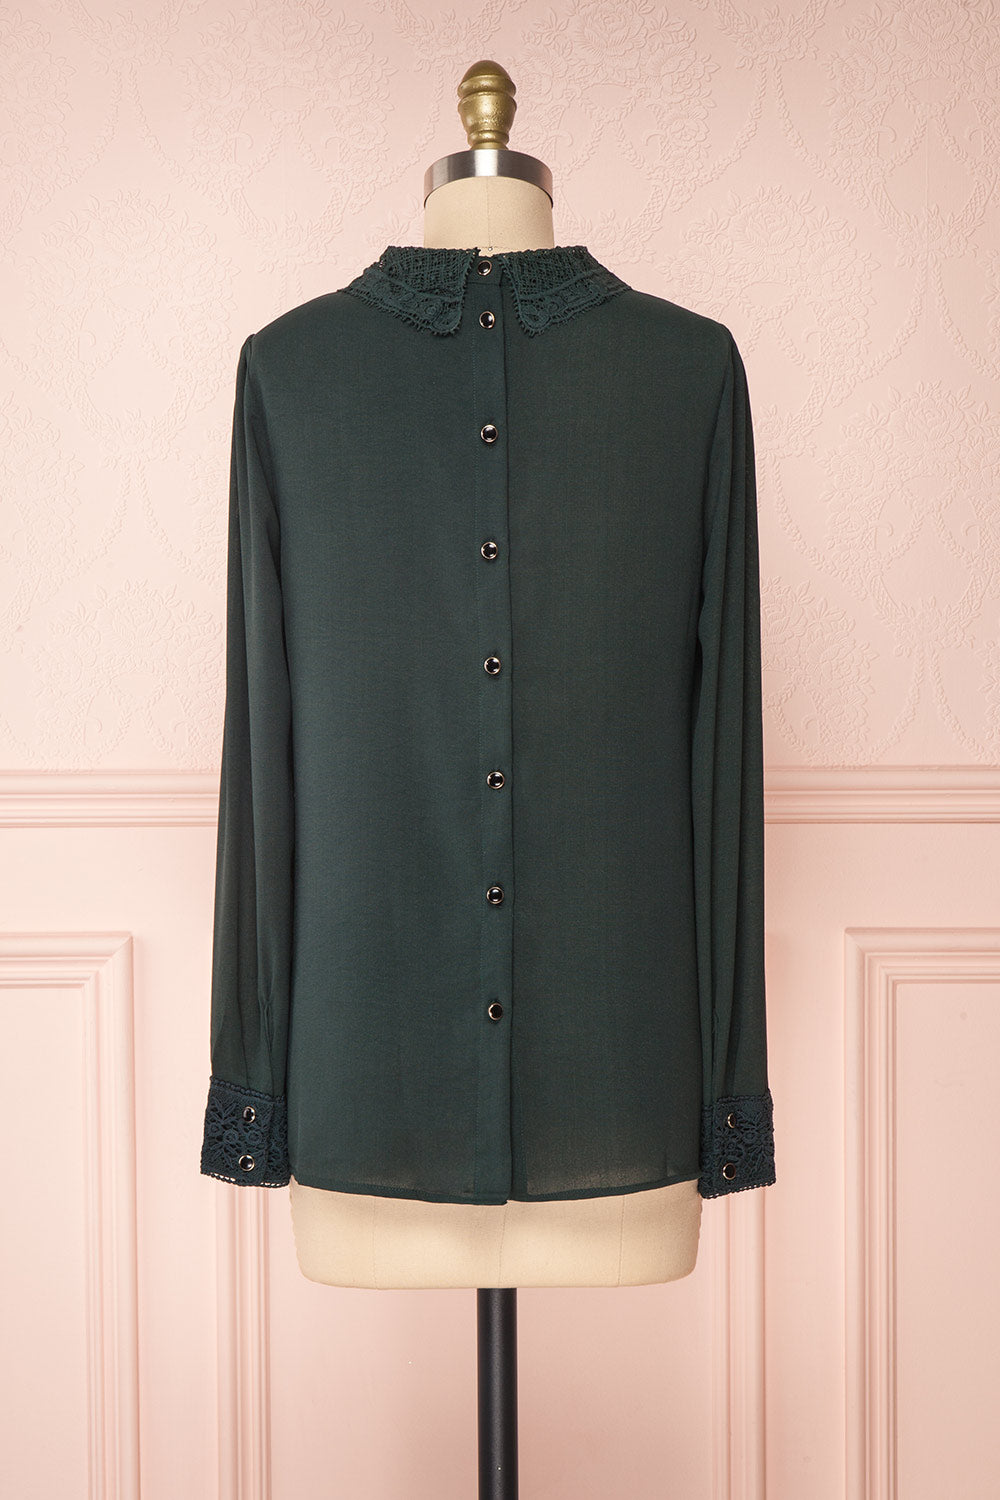 Edel Vert Green Blouse with Lace Collar | Boutique 1861 back view 